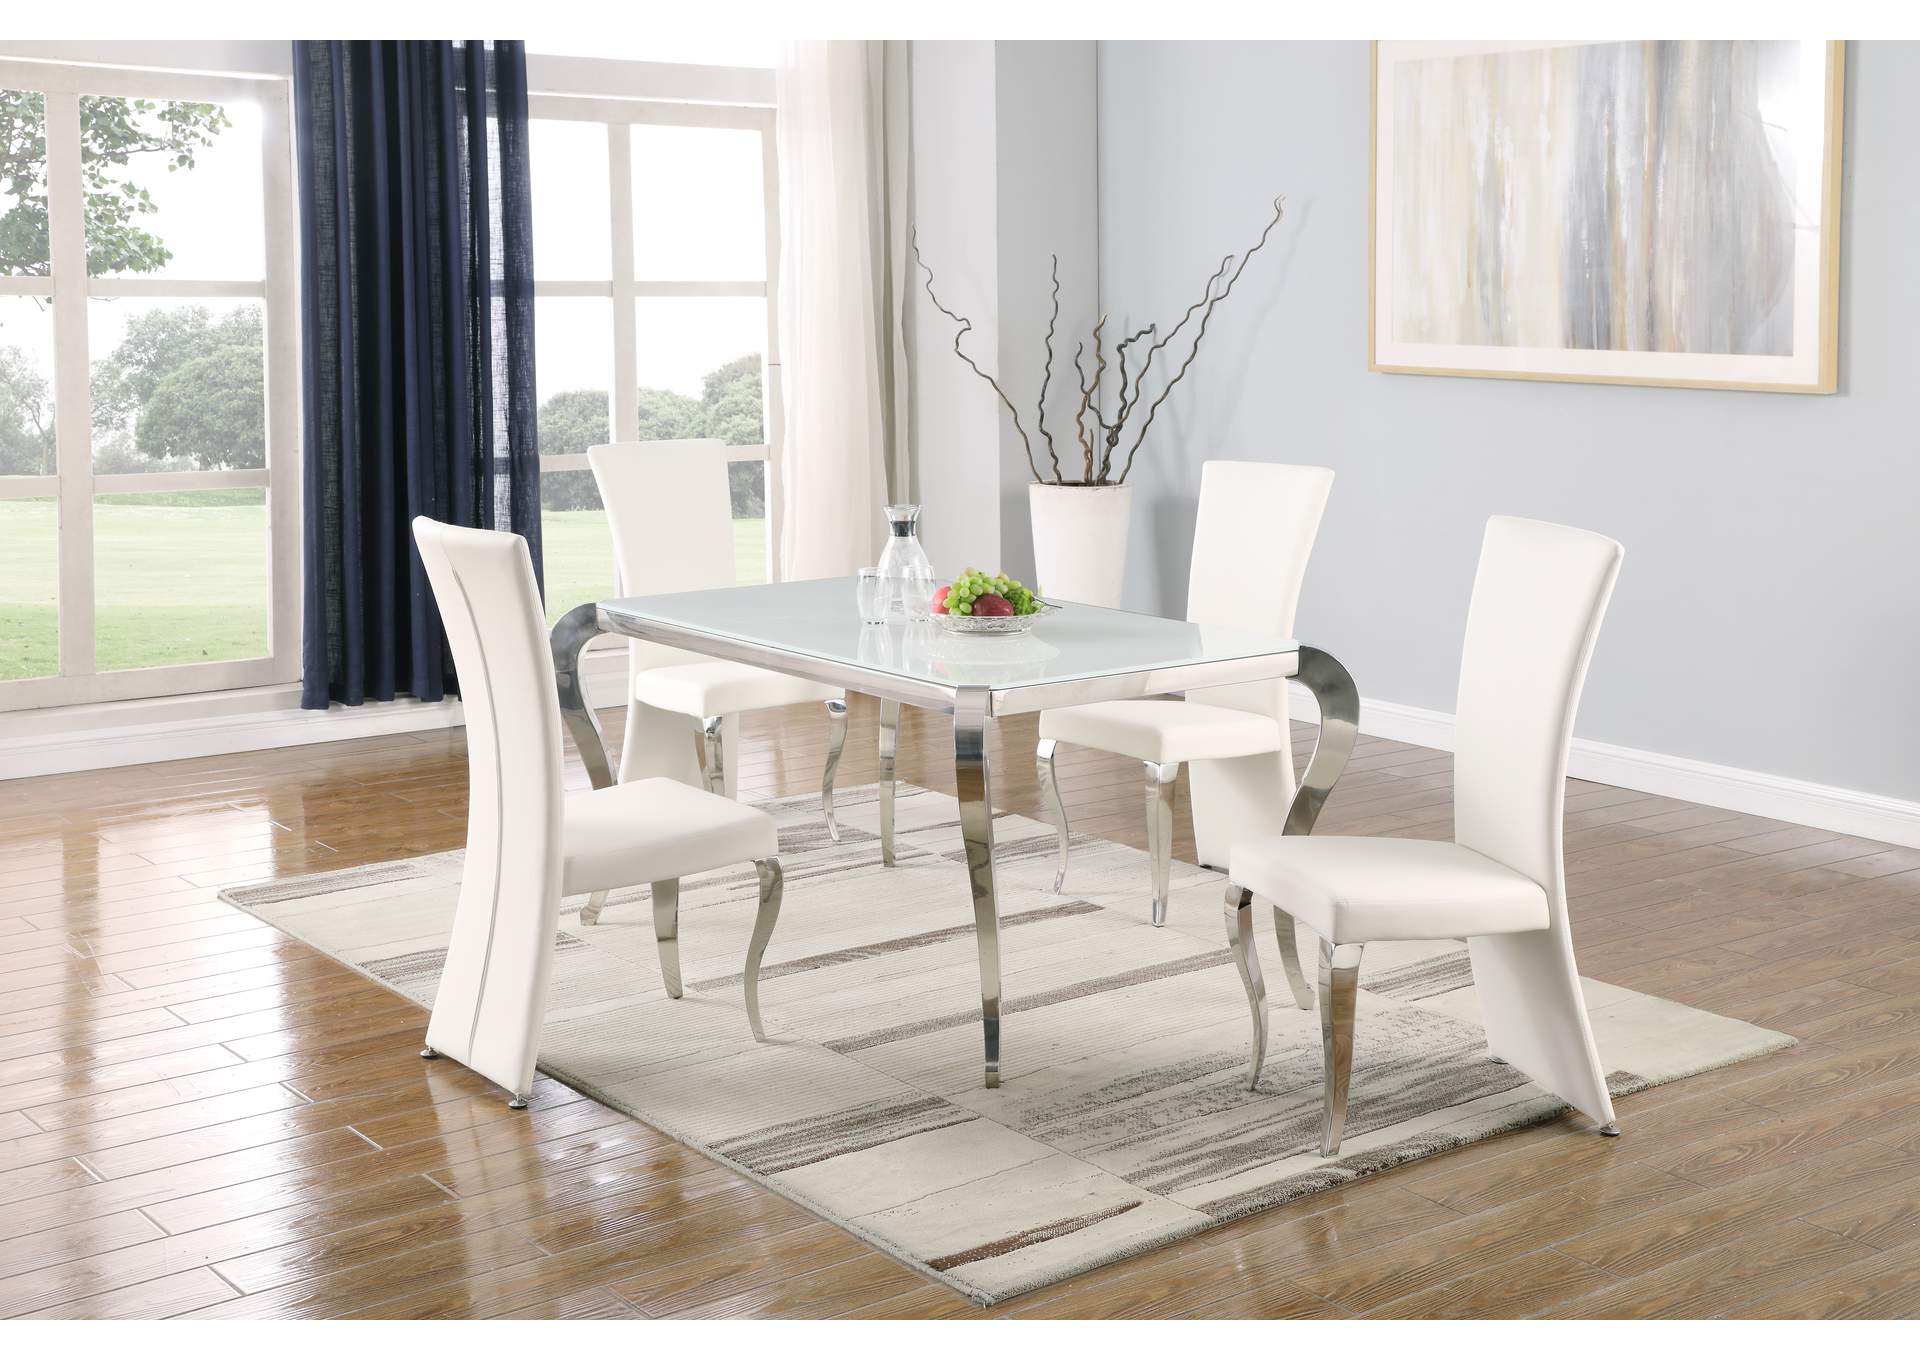 Teresa Super White Super White Starphire Glass Dining Table,Chintaly Imports